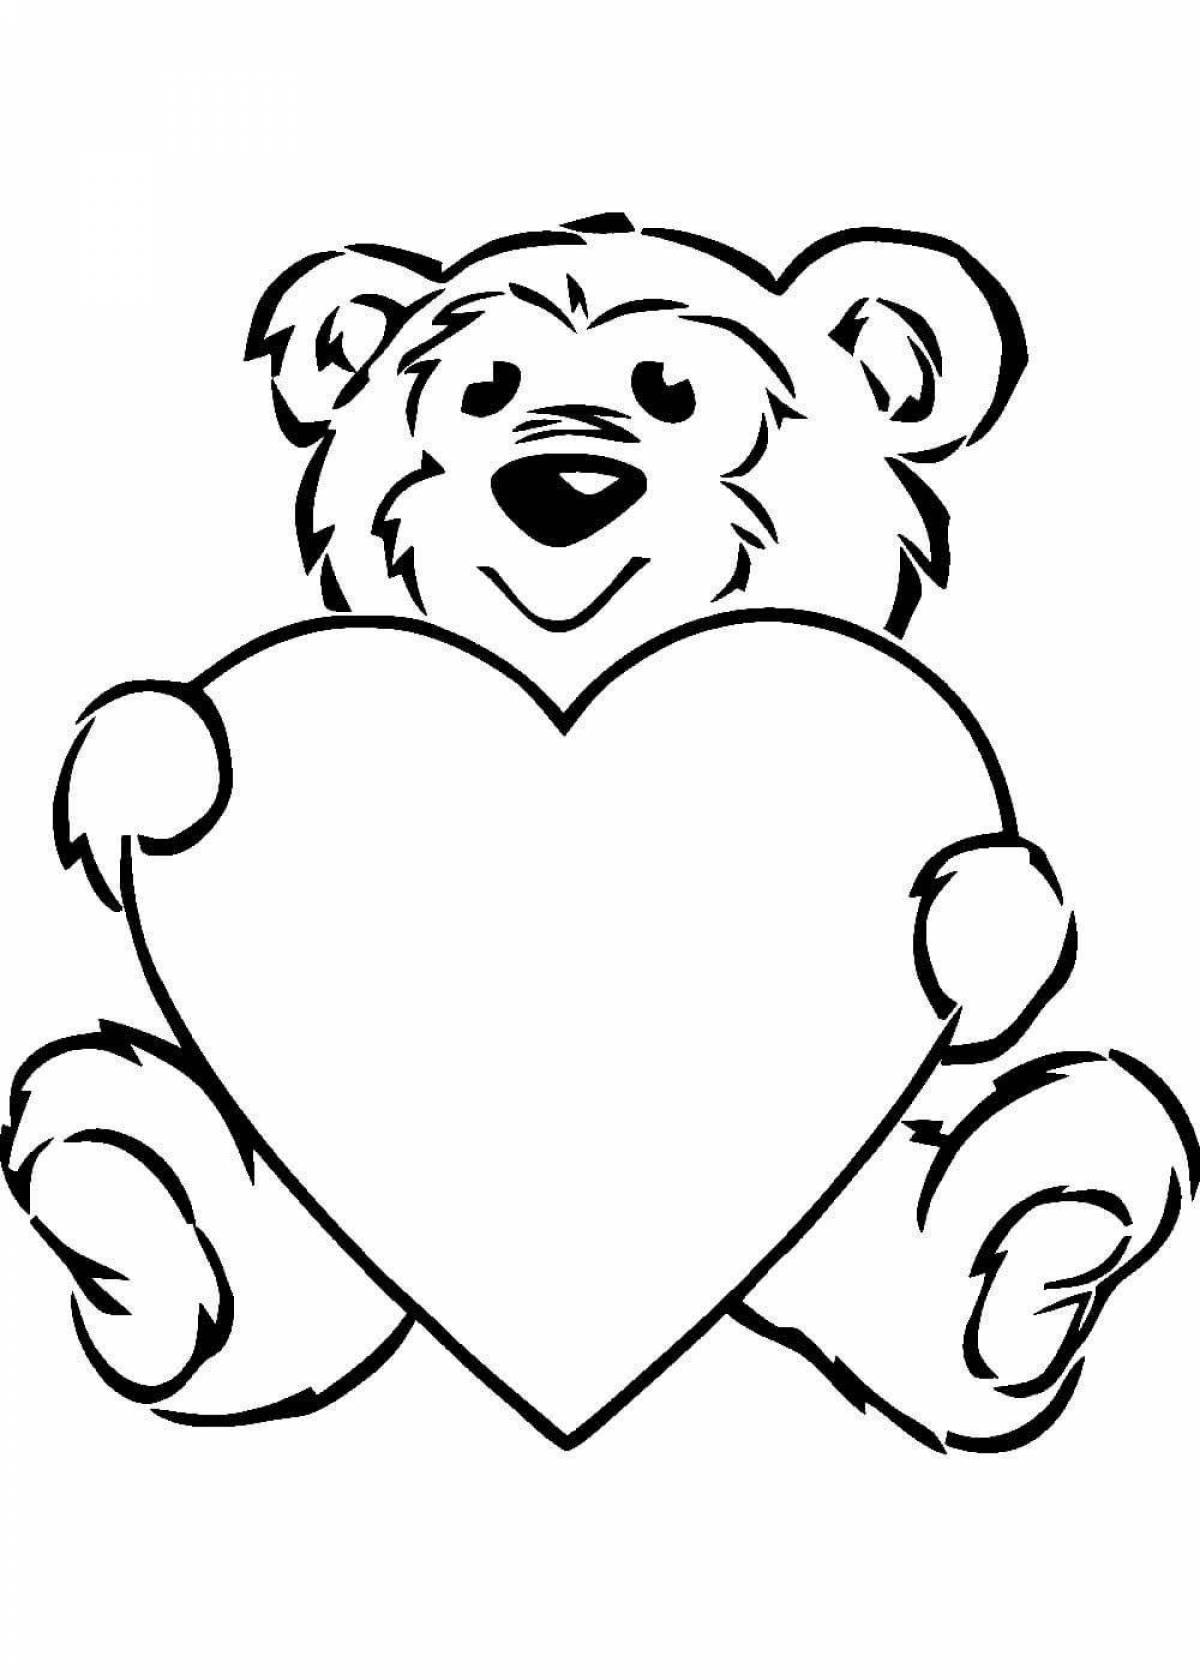 Adorable bear with a heart pattern